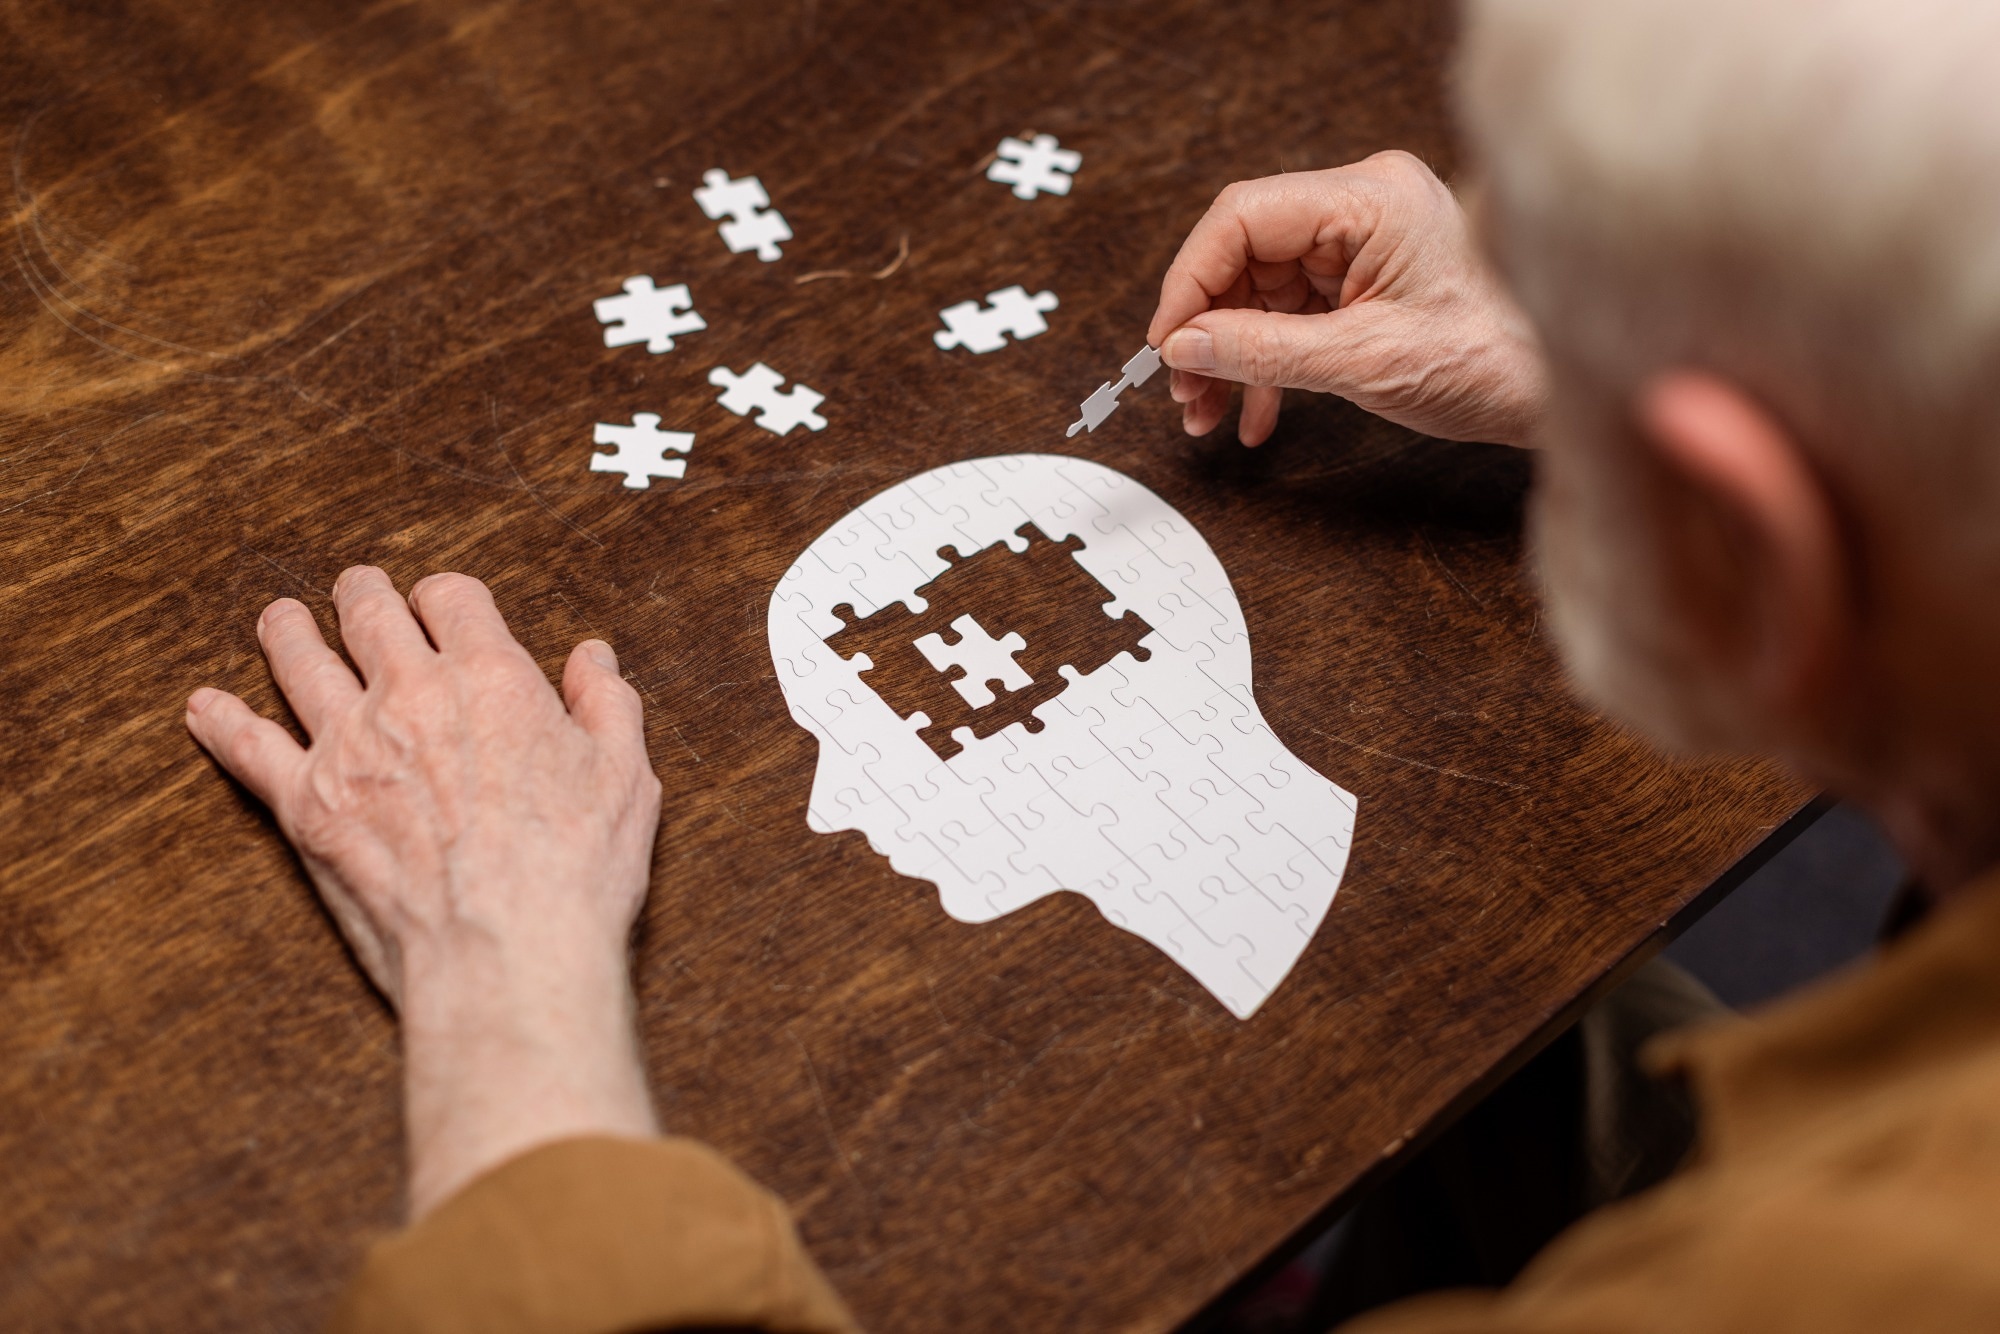 Is posttraumatic epilepsy associated with long-term dementia risk?